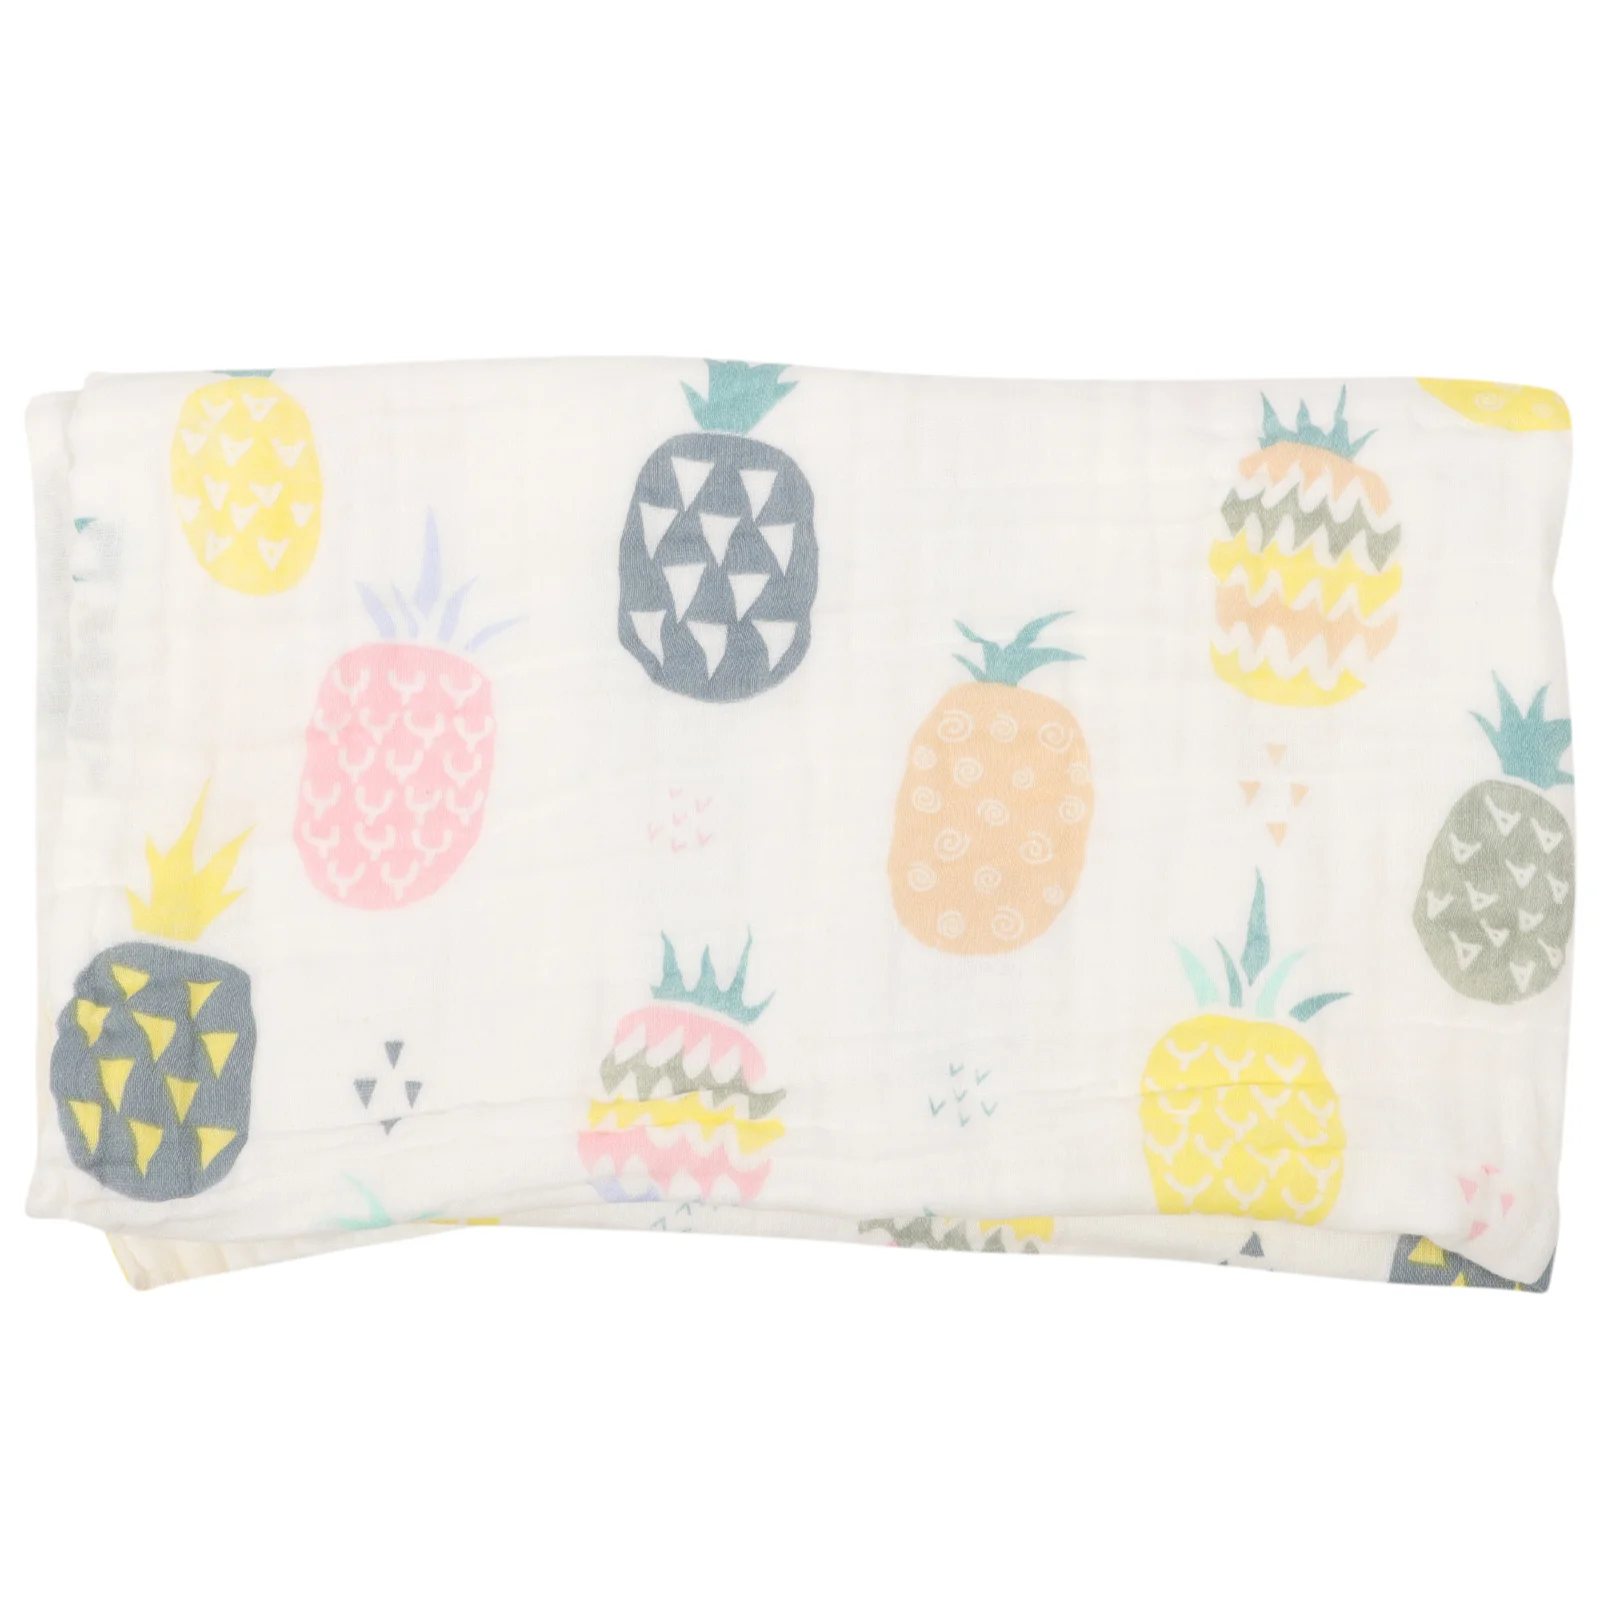 Swaddle Blanket for Infant Toddler Receiving Bath Robe Baby Towels Blankets Girls Pineapple